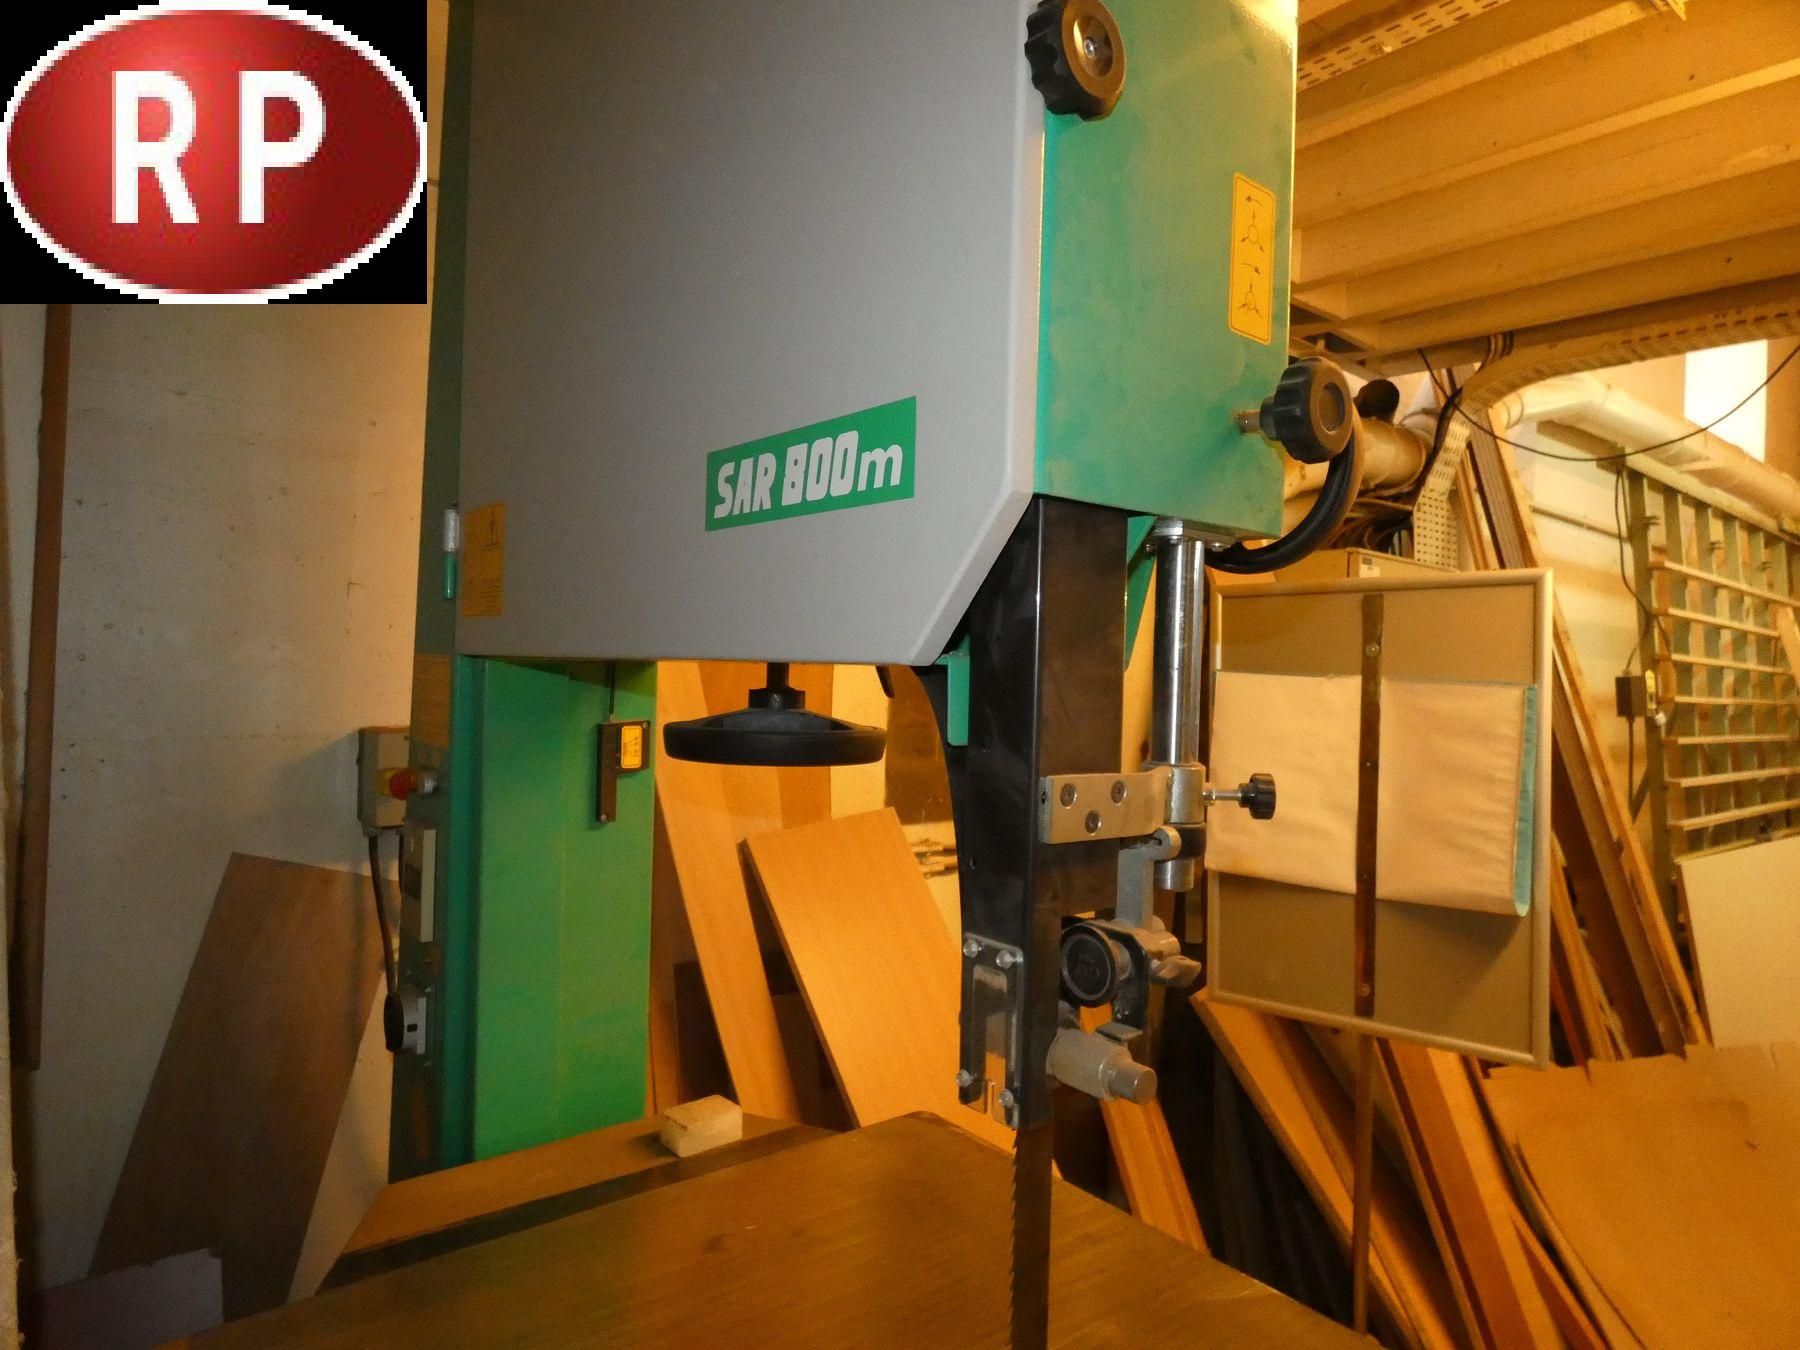 Null NC][RP] MEBER band saw, model SAR 800m, no. 88/1877, year of commissioning &hellip;